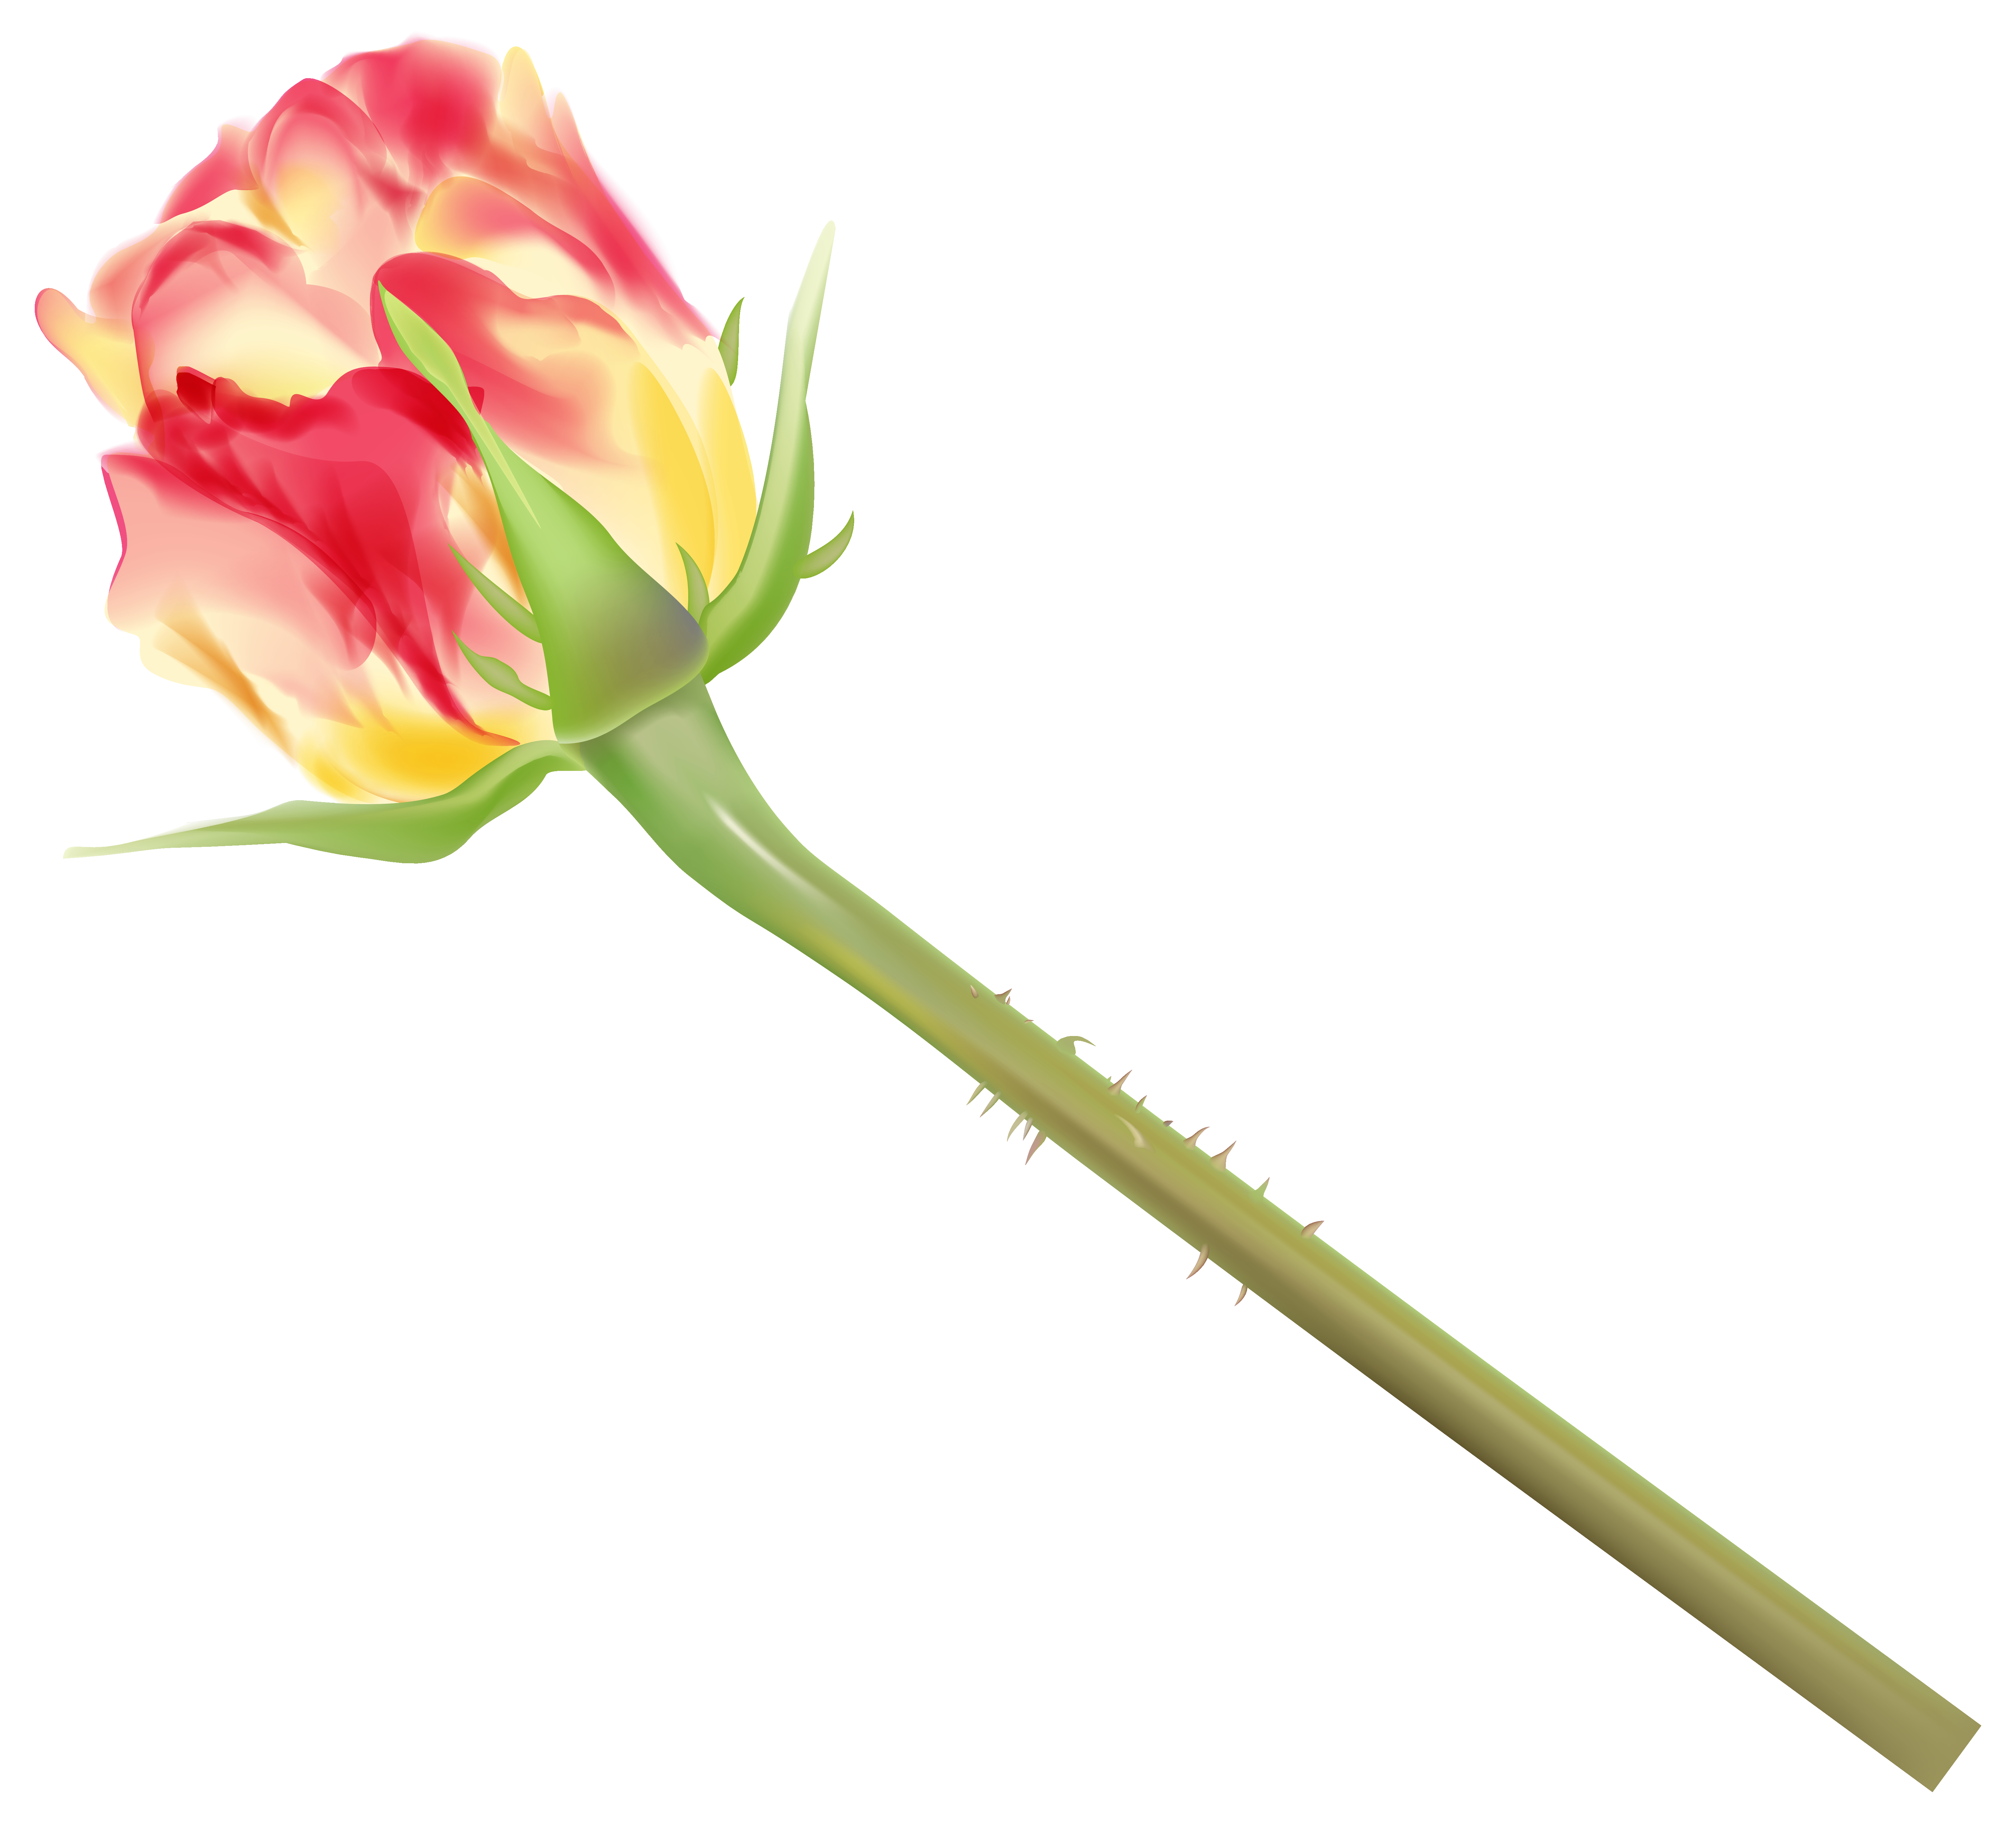 Yellow and Red Rose Bud PNG Clipart Image.